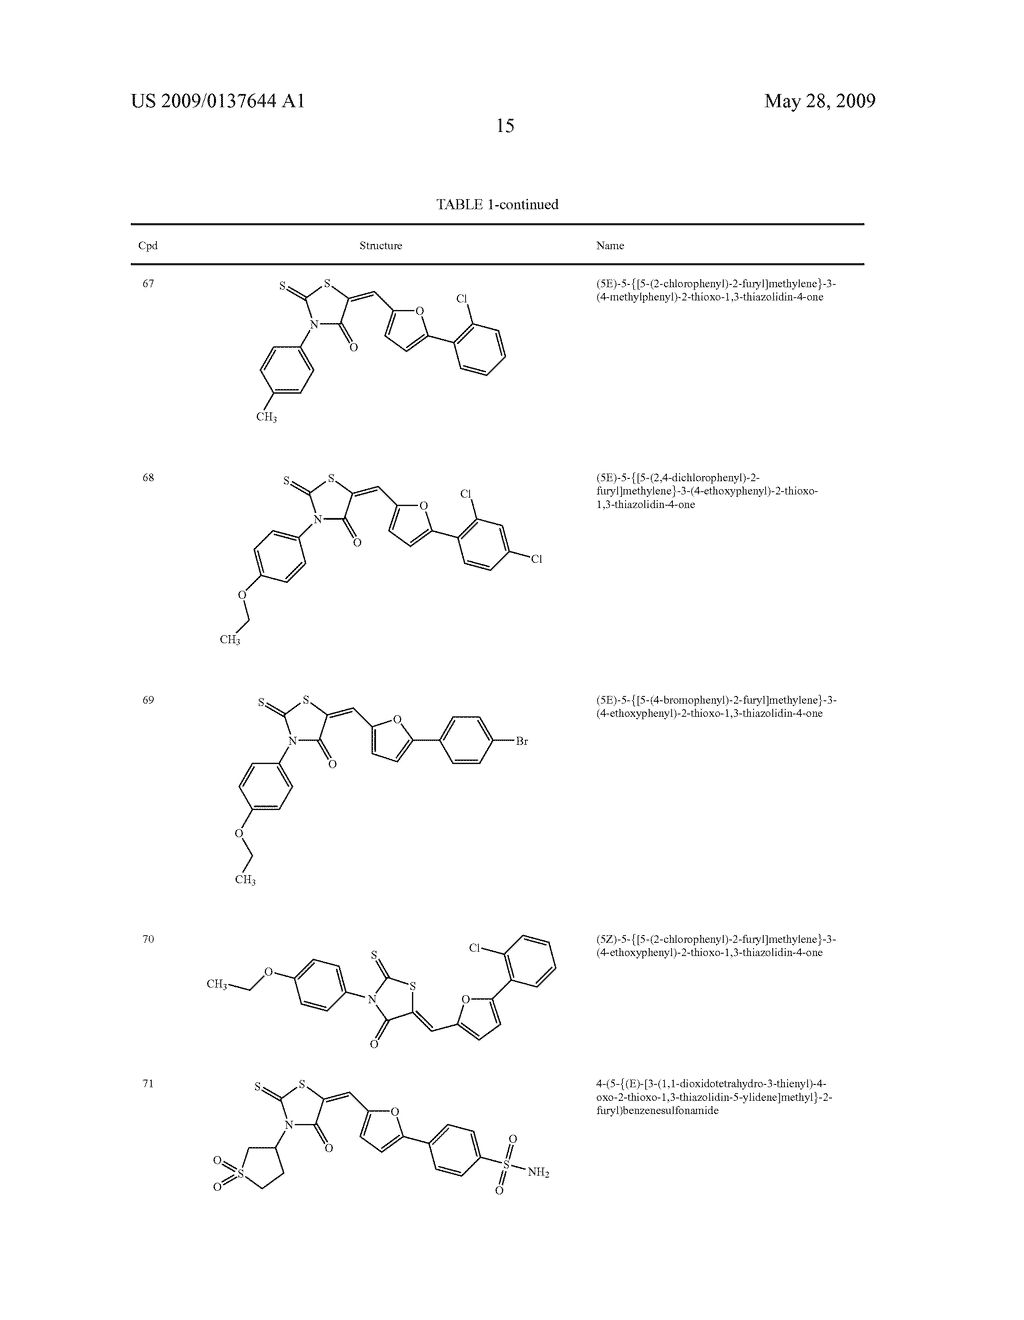 RHODANINE COMPOSITIONS FOR USE AS ANTIVIRAL AGENTS - diagram, schematic, and image 16